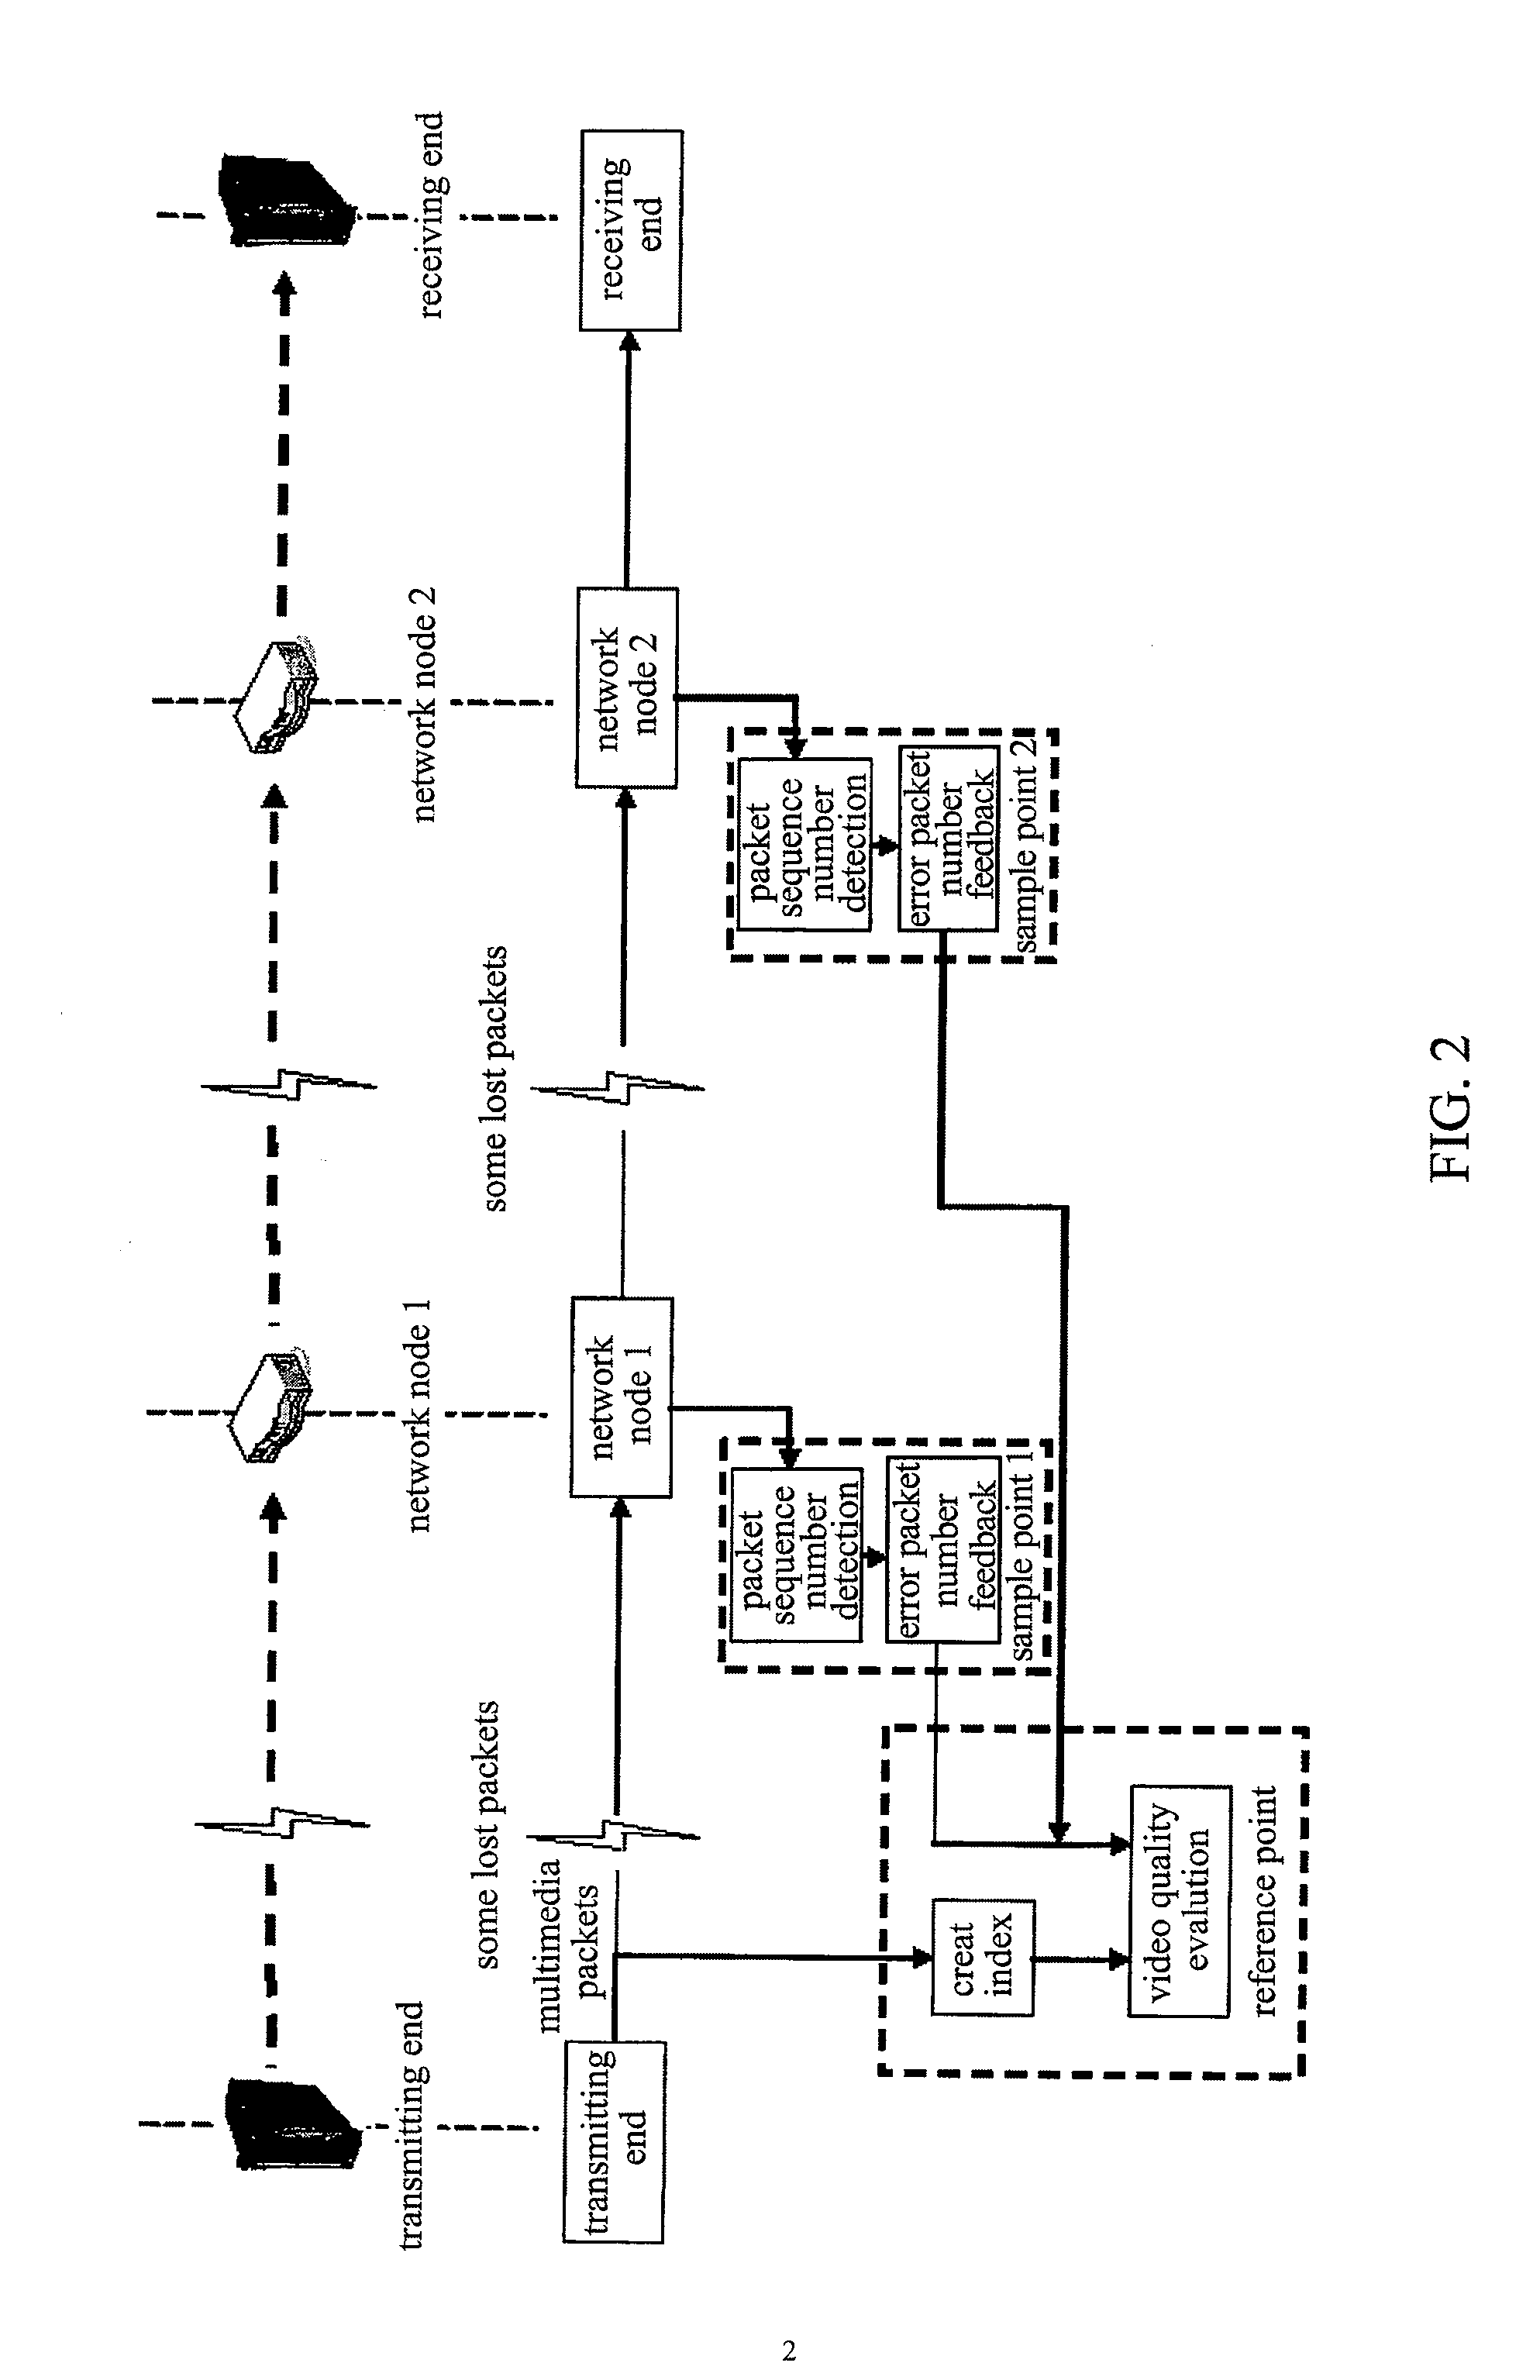 Method and System of Multimedia Service Performance Monitoring